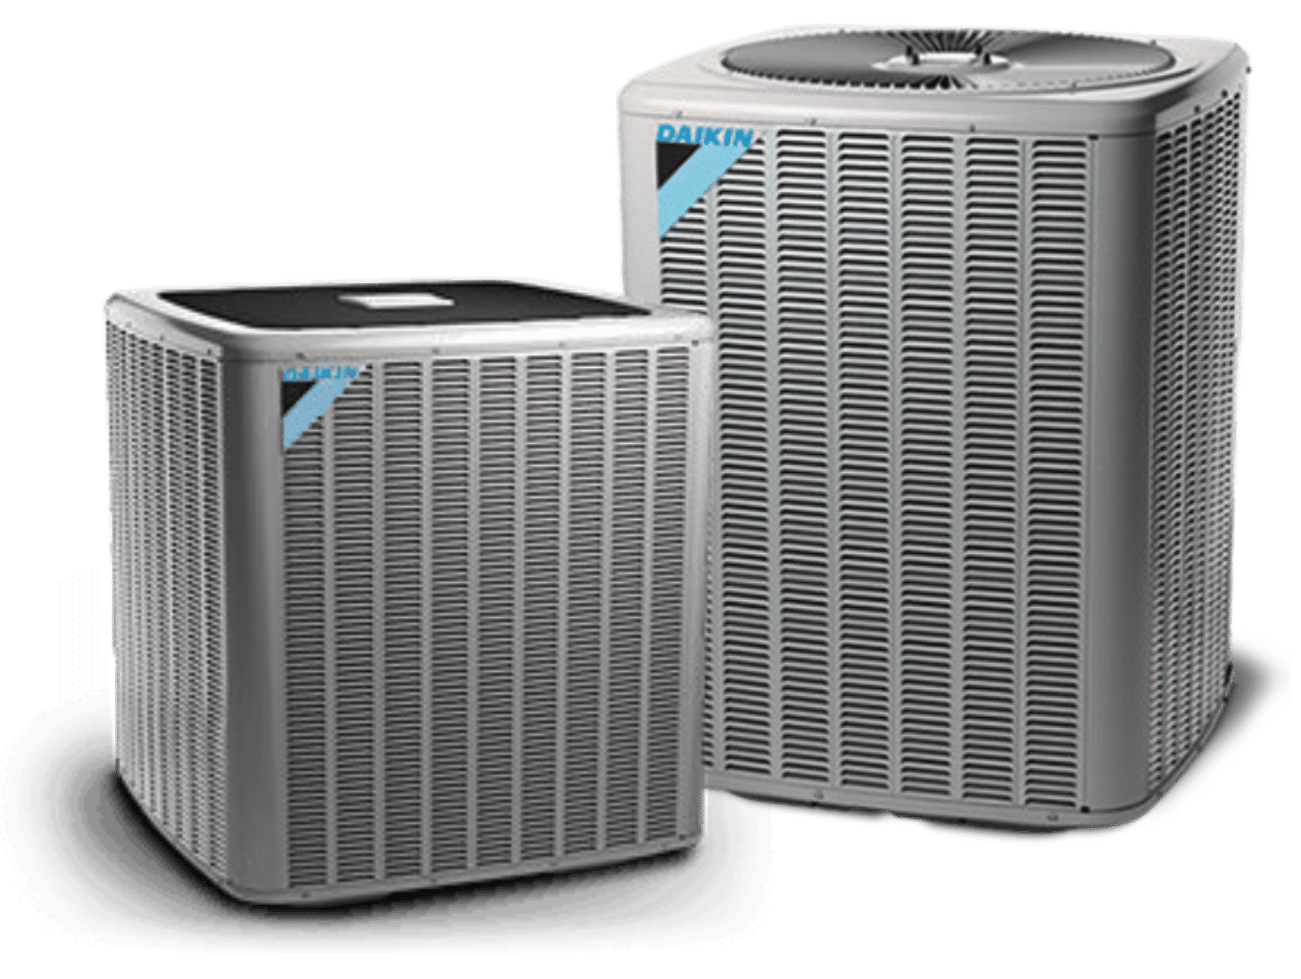 Propane Furnace vs. Heat Pump: Which Is Best For Heating Your Home